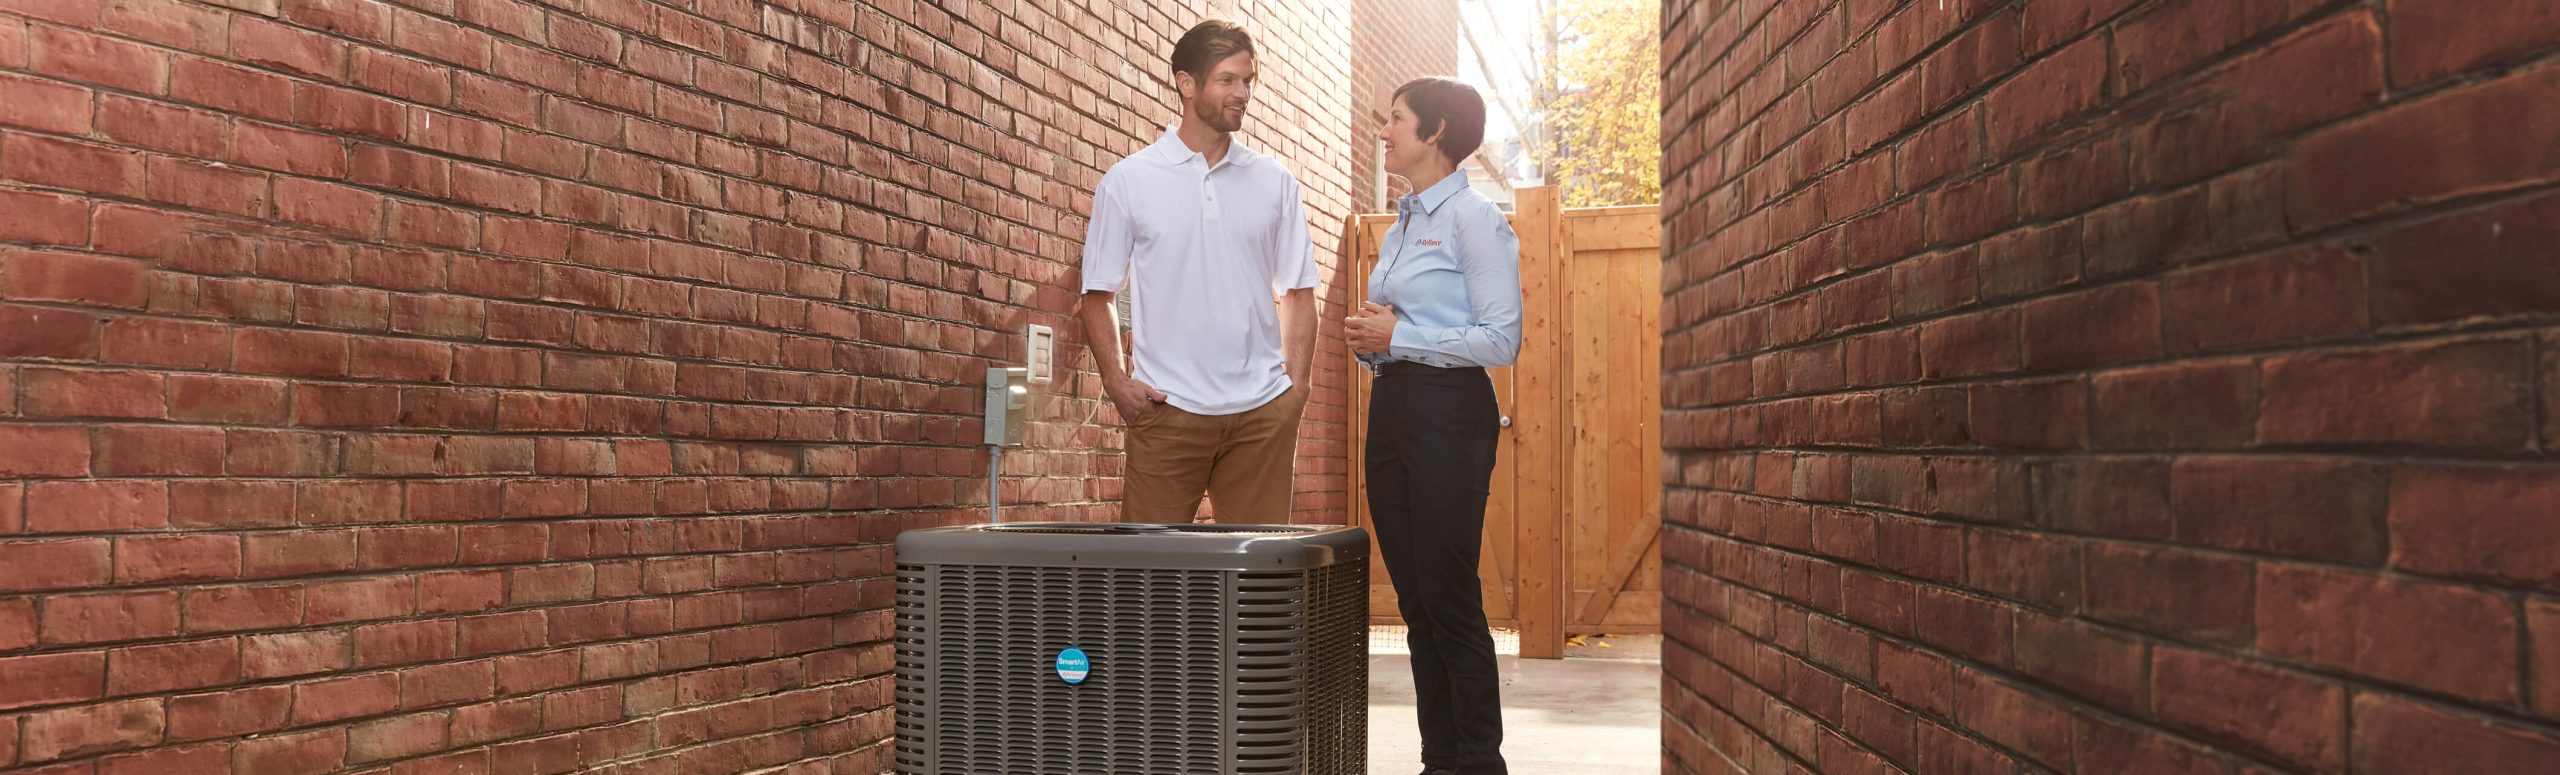 Reliance service worker and client conversing next to the AC